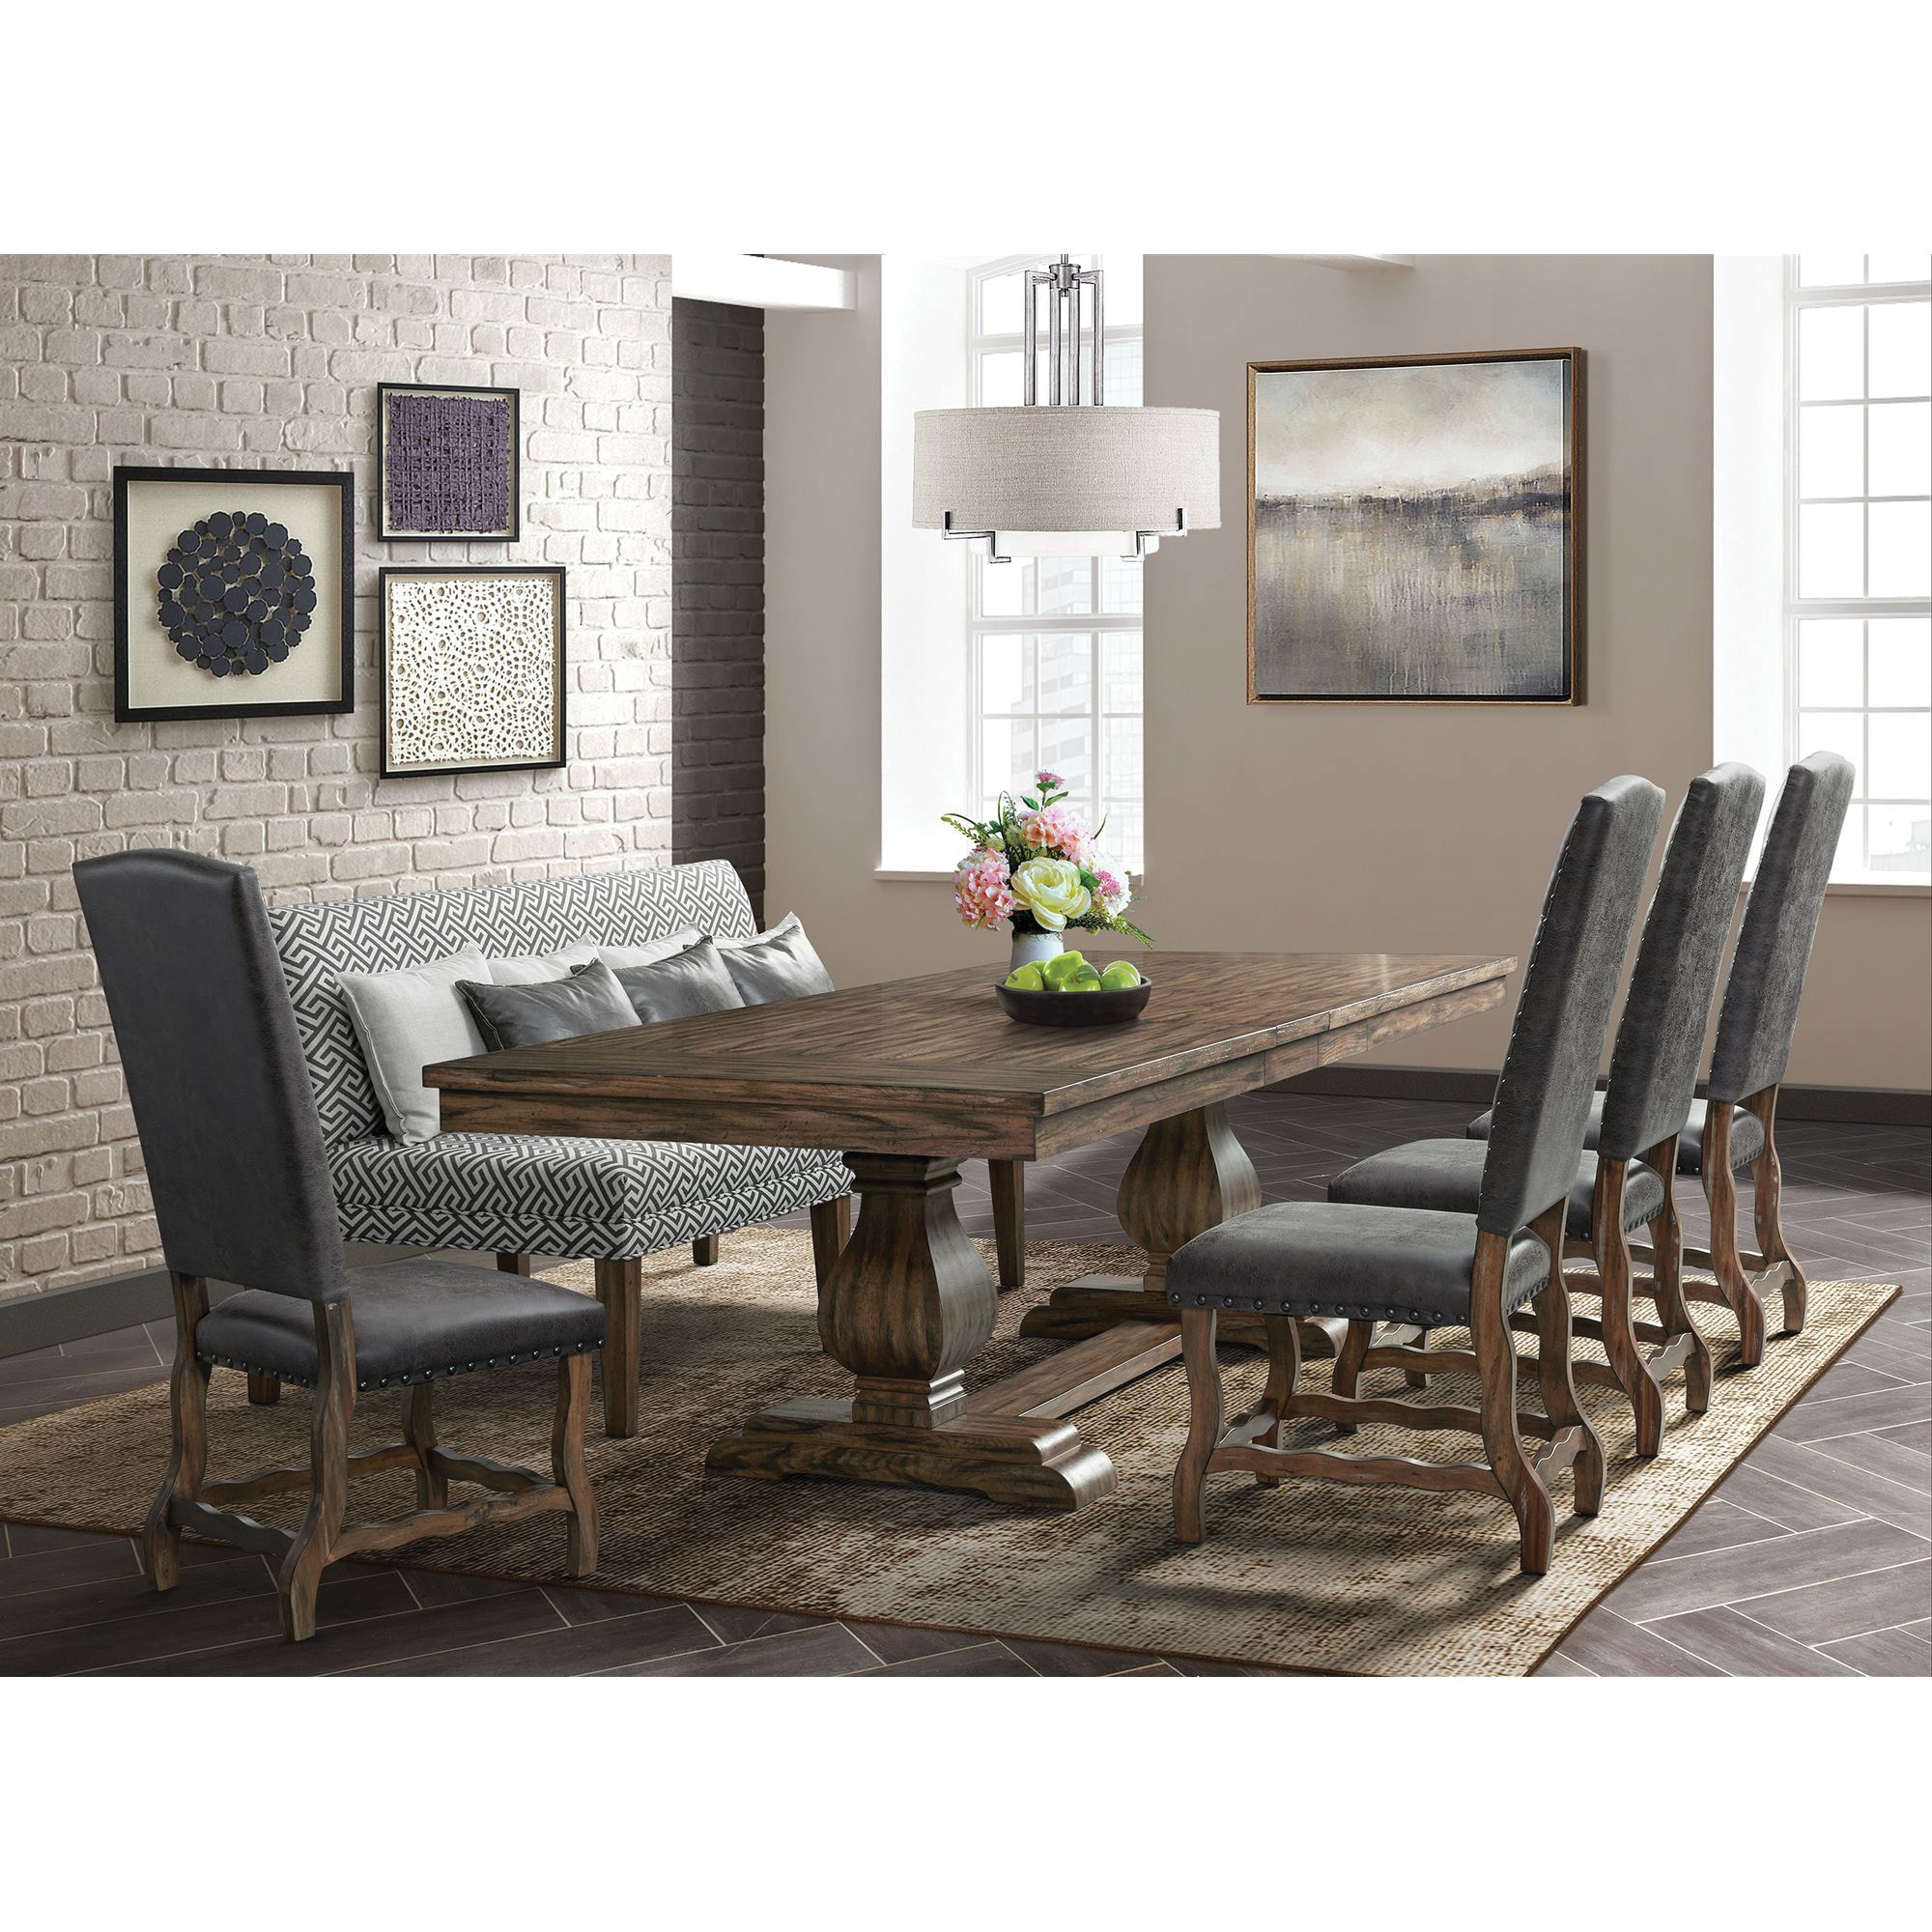 Evelin 6 Piece Dining Room Set Levin, Dining Room Table And Chairs Set Of 6